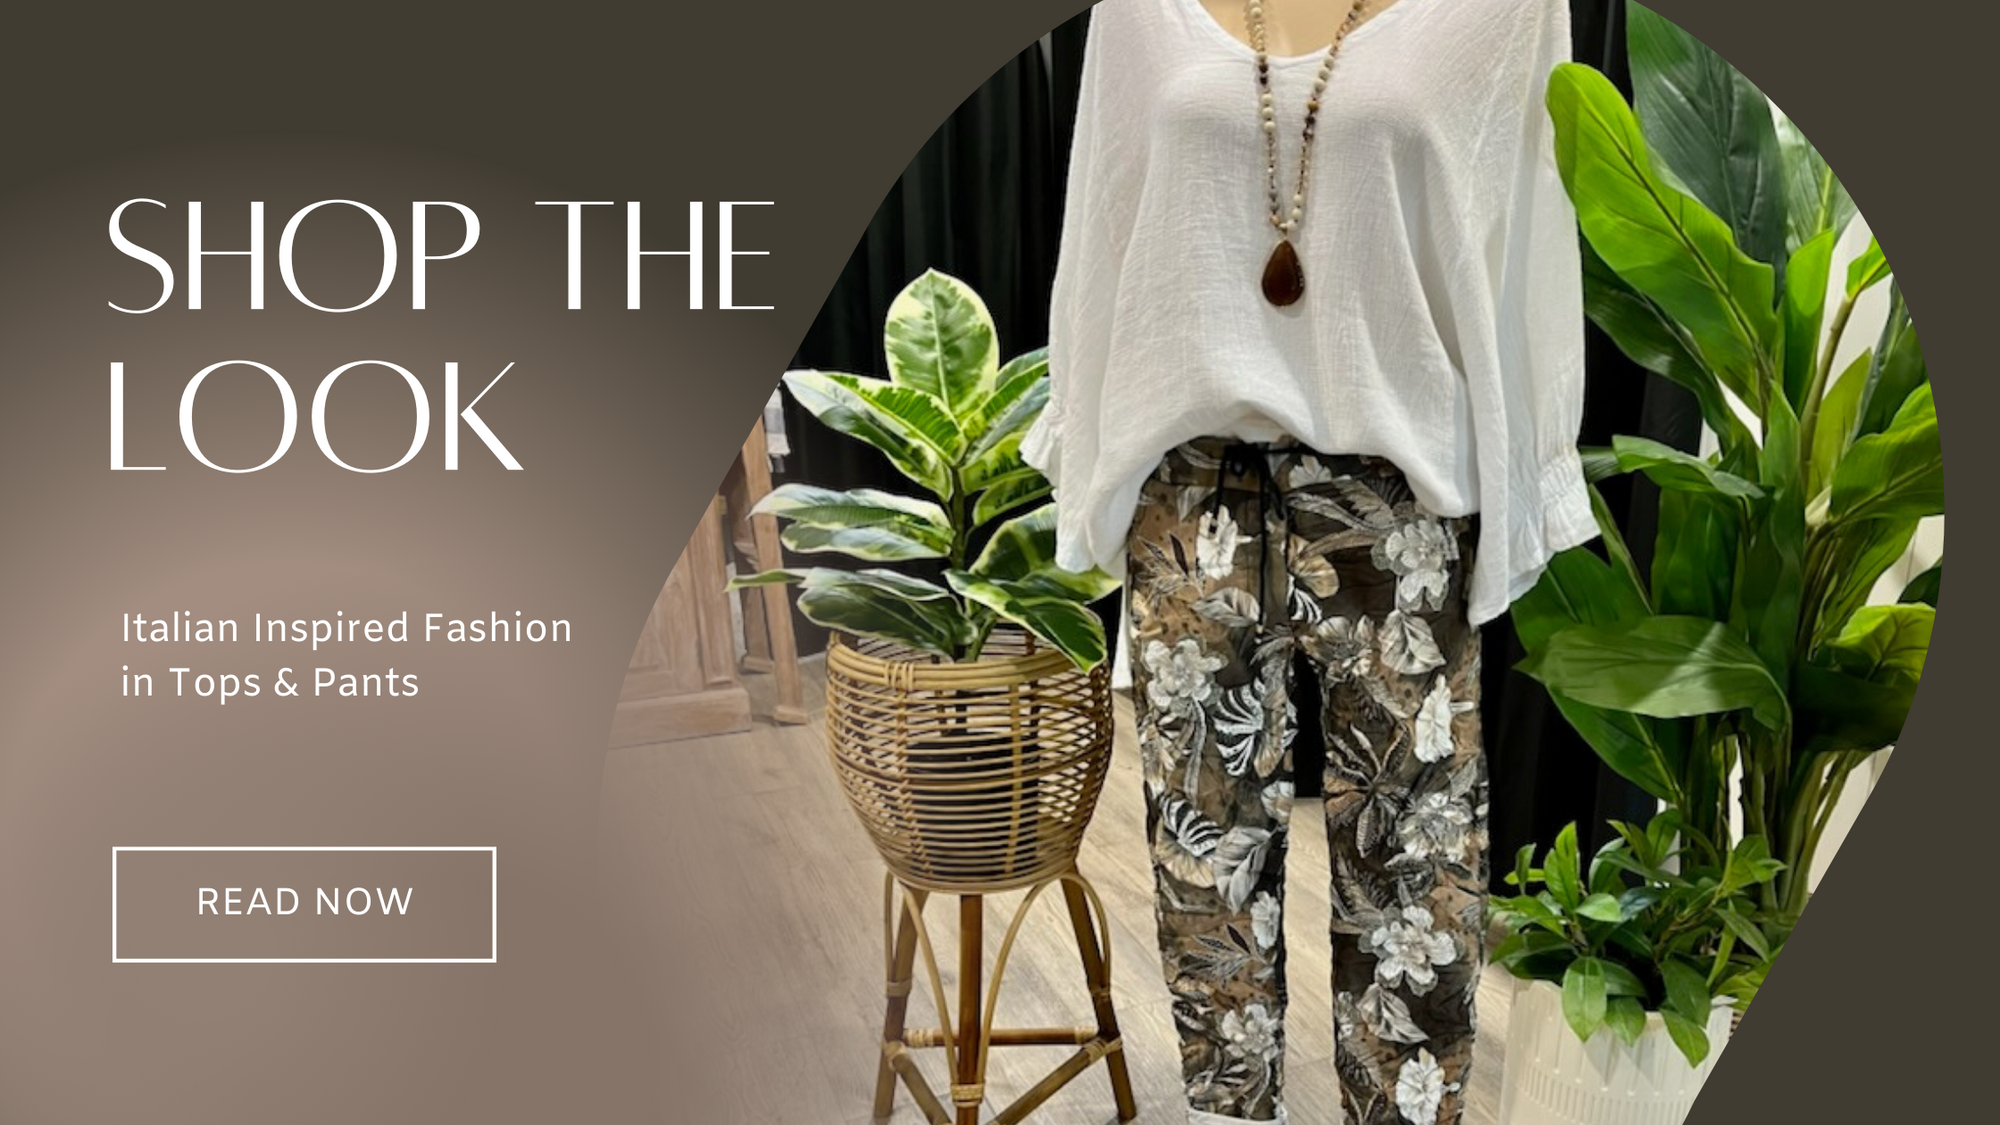 Shop the Look - Italian Inspired Fashion in Tops & Pants